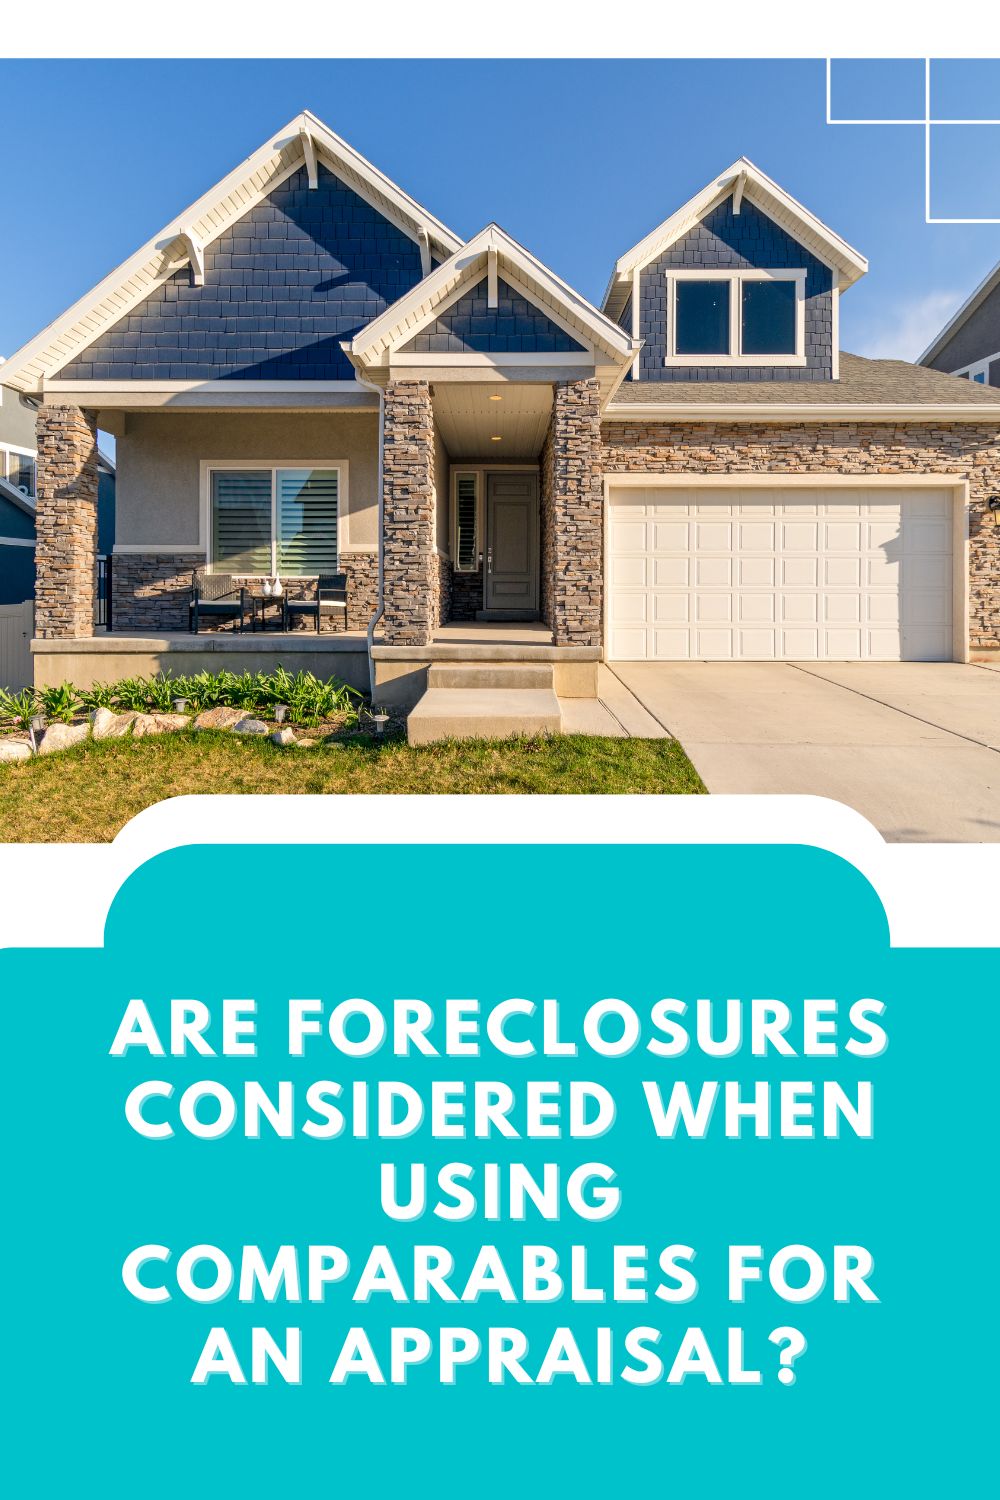 Are Foreclosures Considered when Using Comparables for an Appraisal?